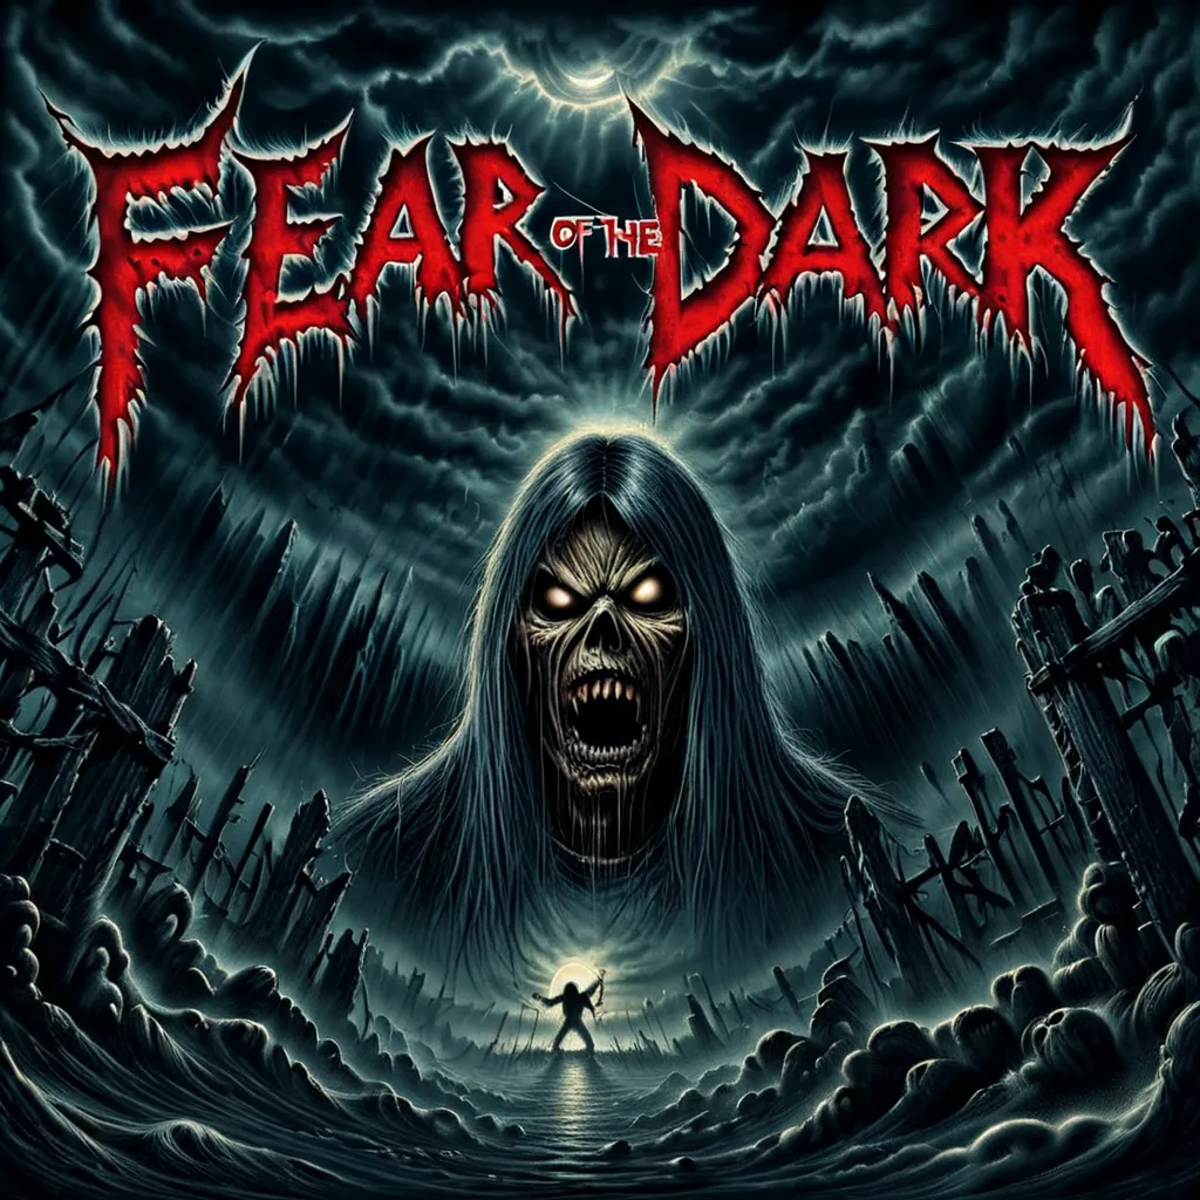 Fear of the Dark, a dark and scary scene with a screaming face.